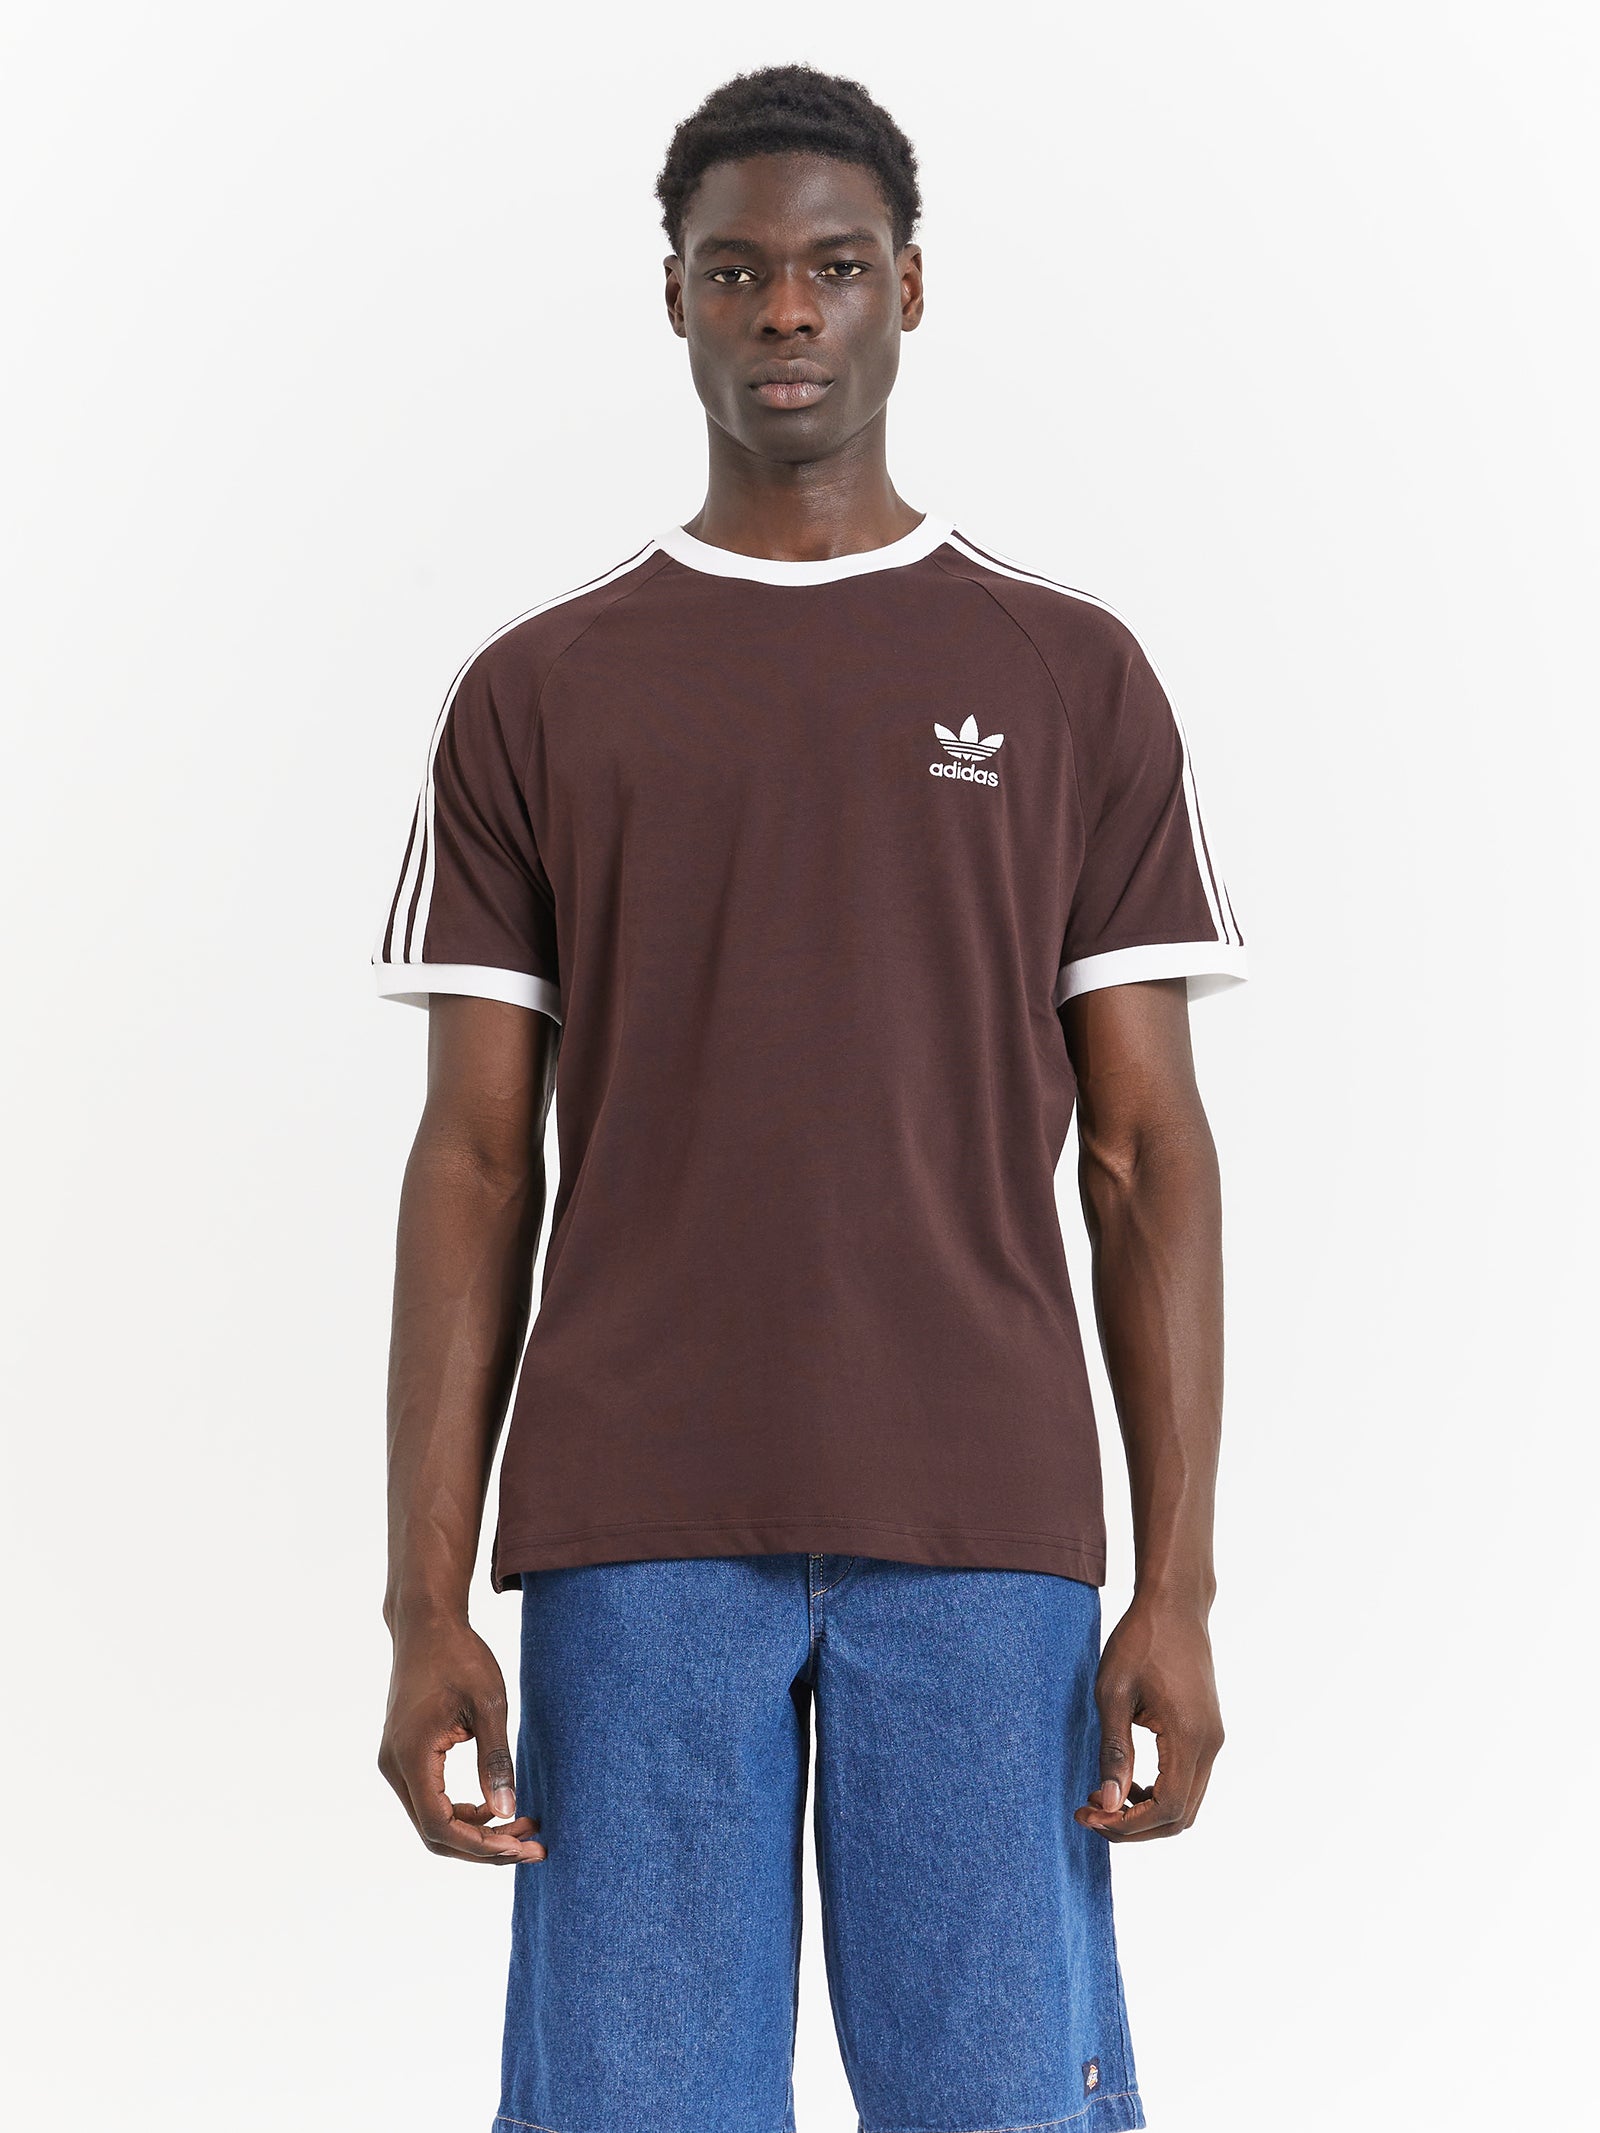 Adicolor Classics 3-Stripes T-Shirt in Shadow Brown